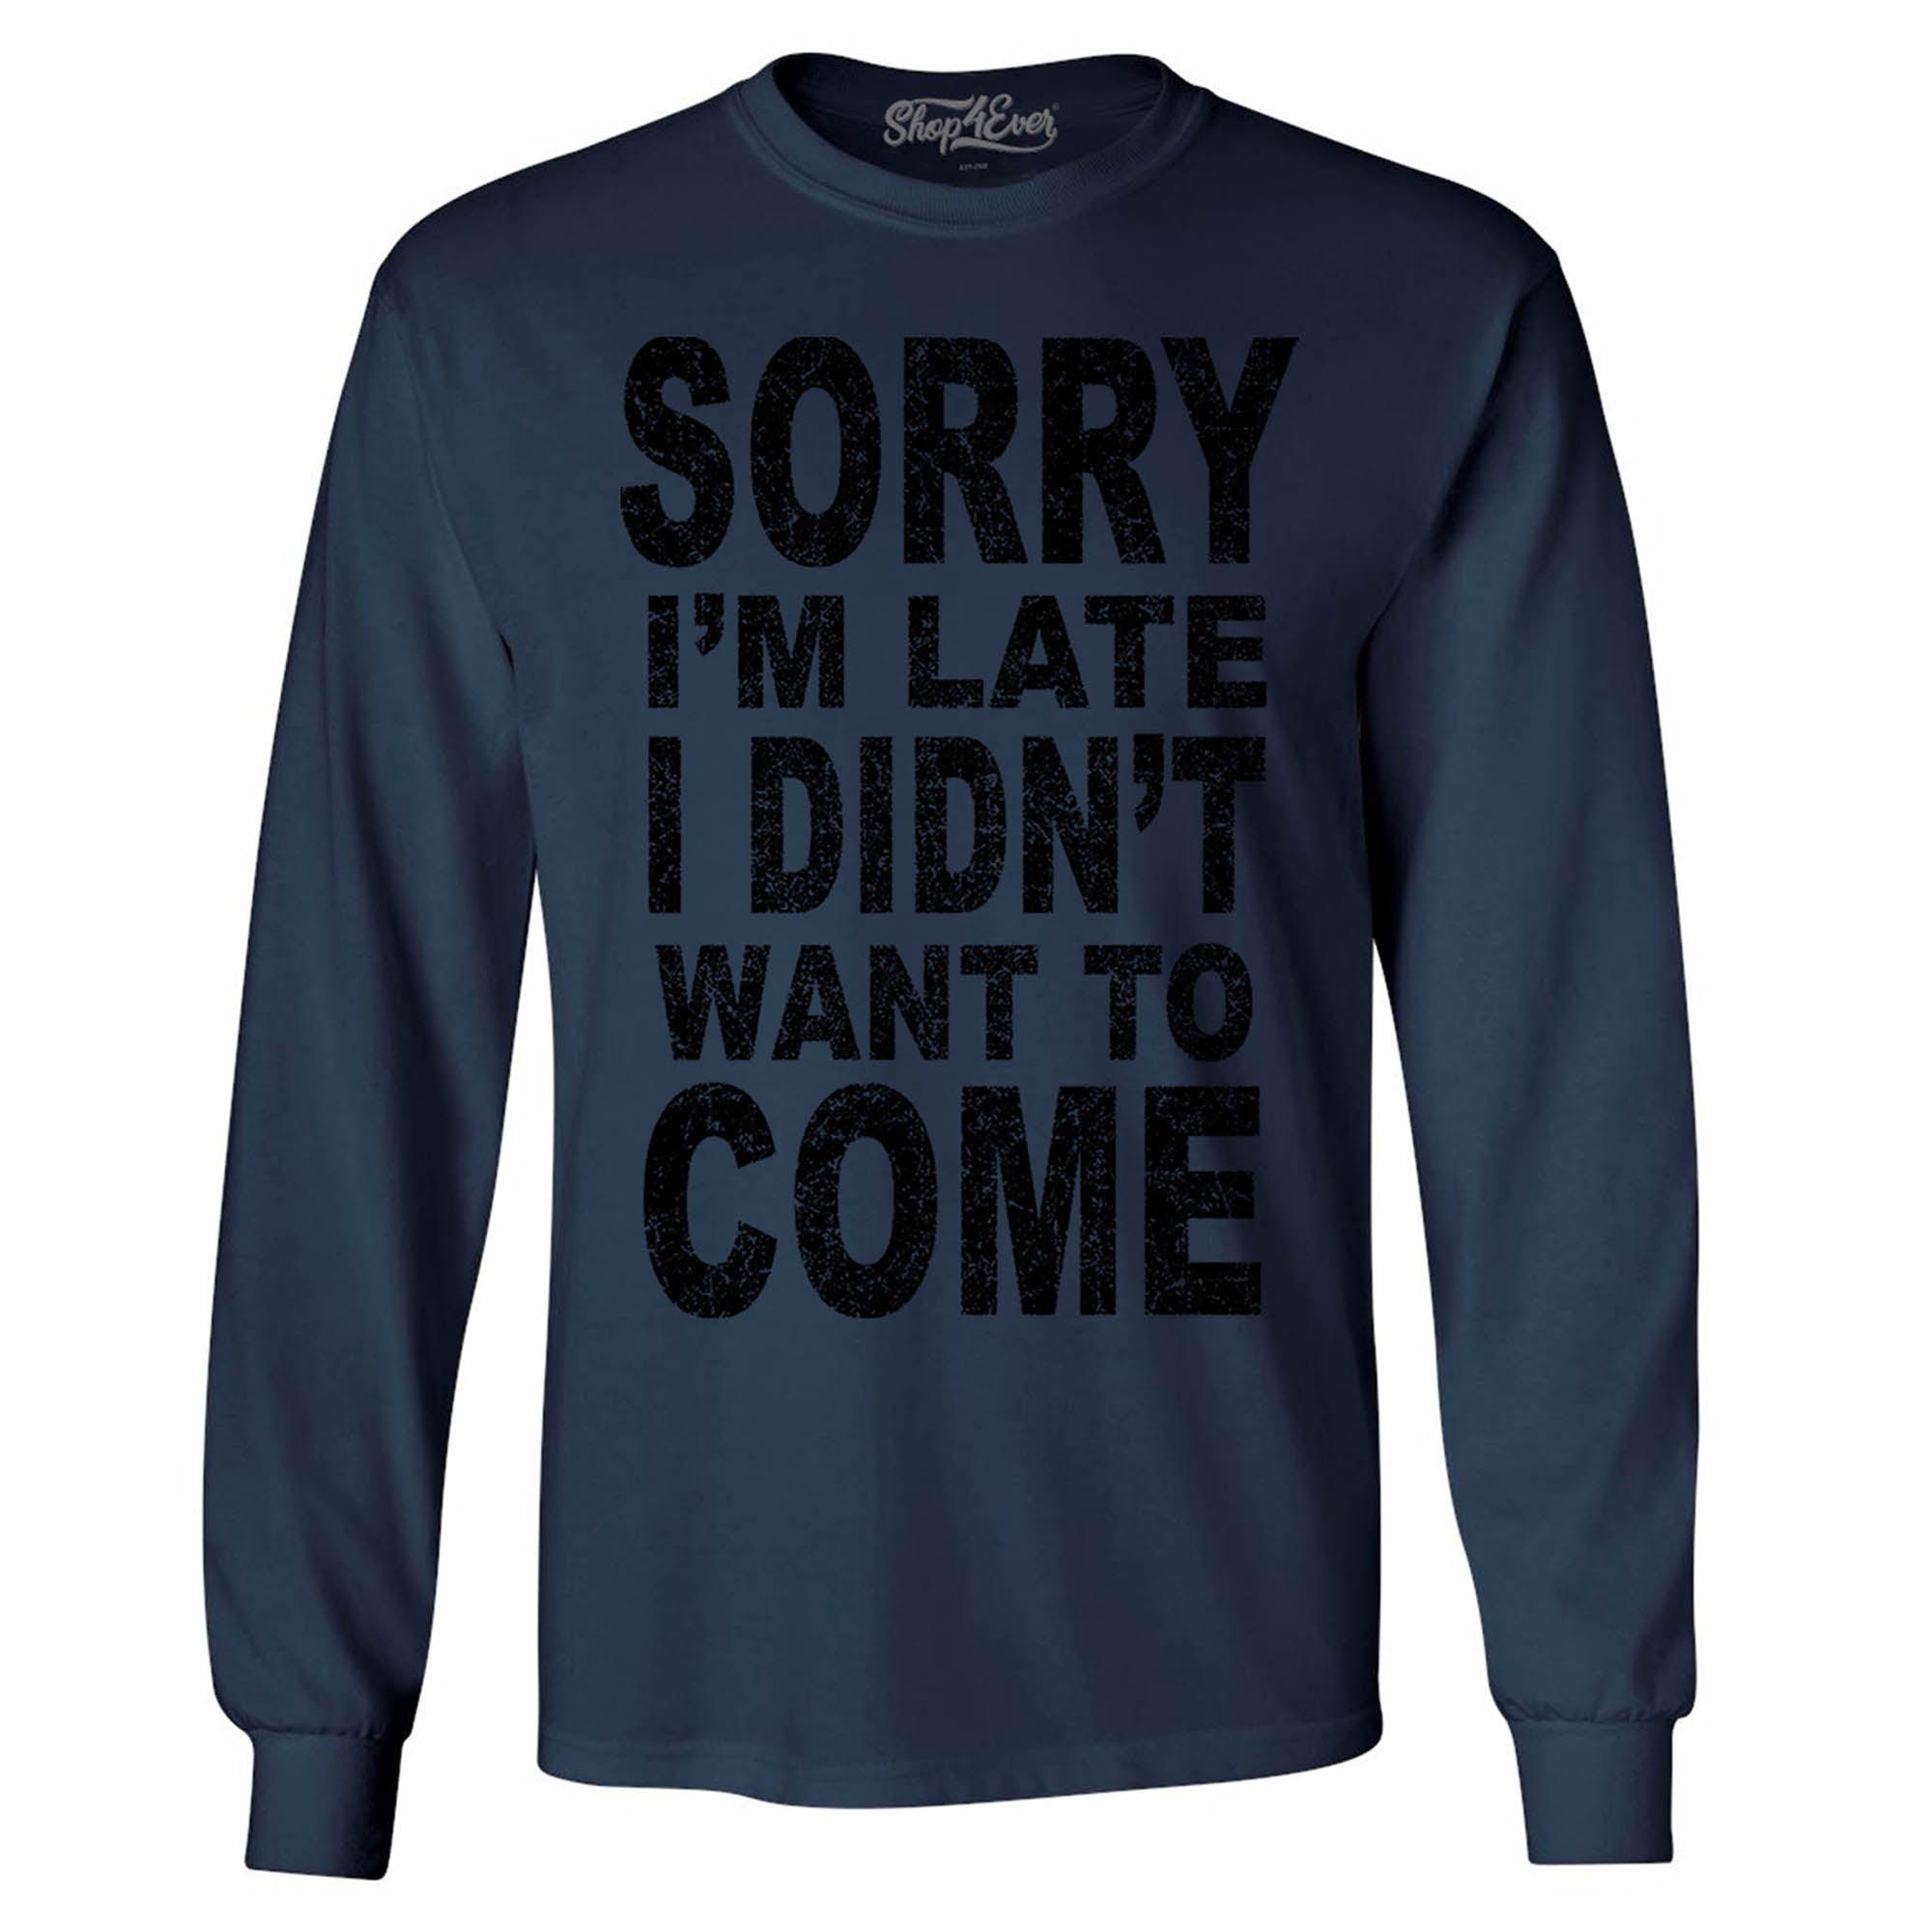 Sorry I'm Late I Didn't Want to Come Black Long Sleeve Shirt Sayings Shirts